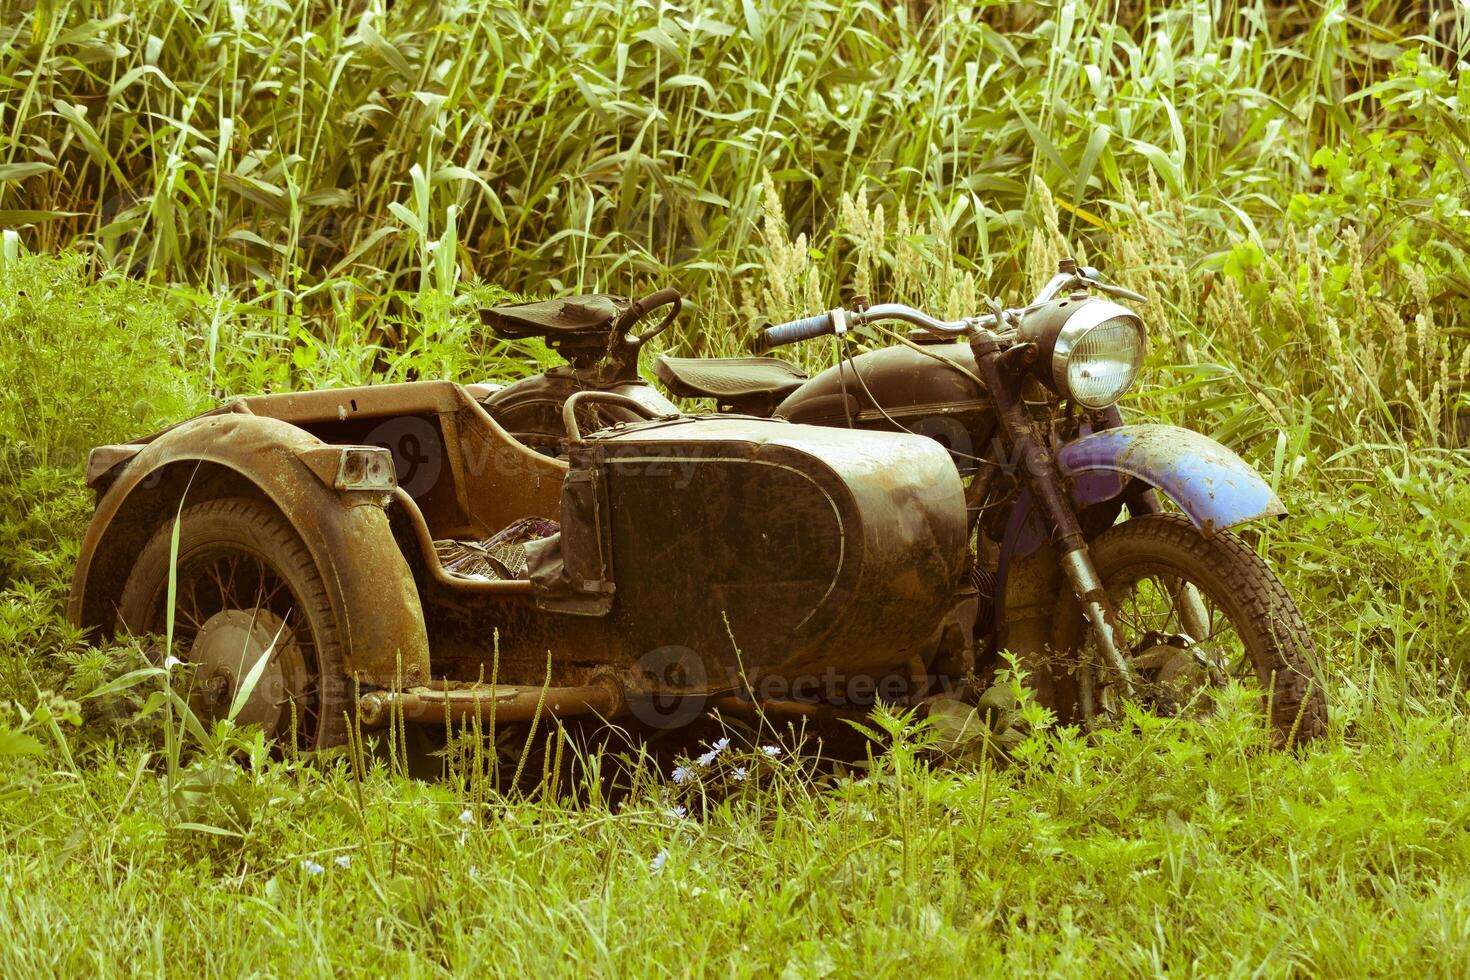 Old Soviet motorcycle with a cradle. An old mototechnique photo